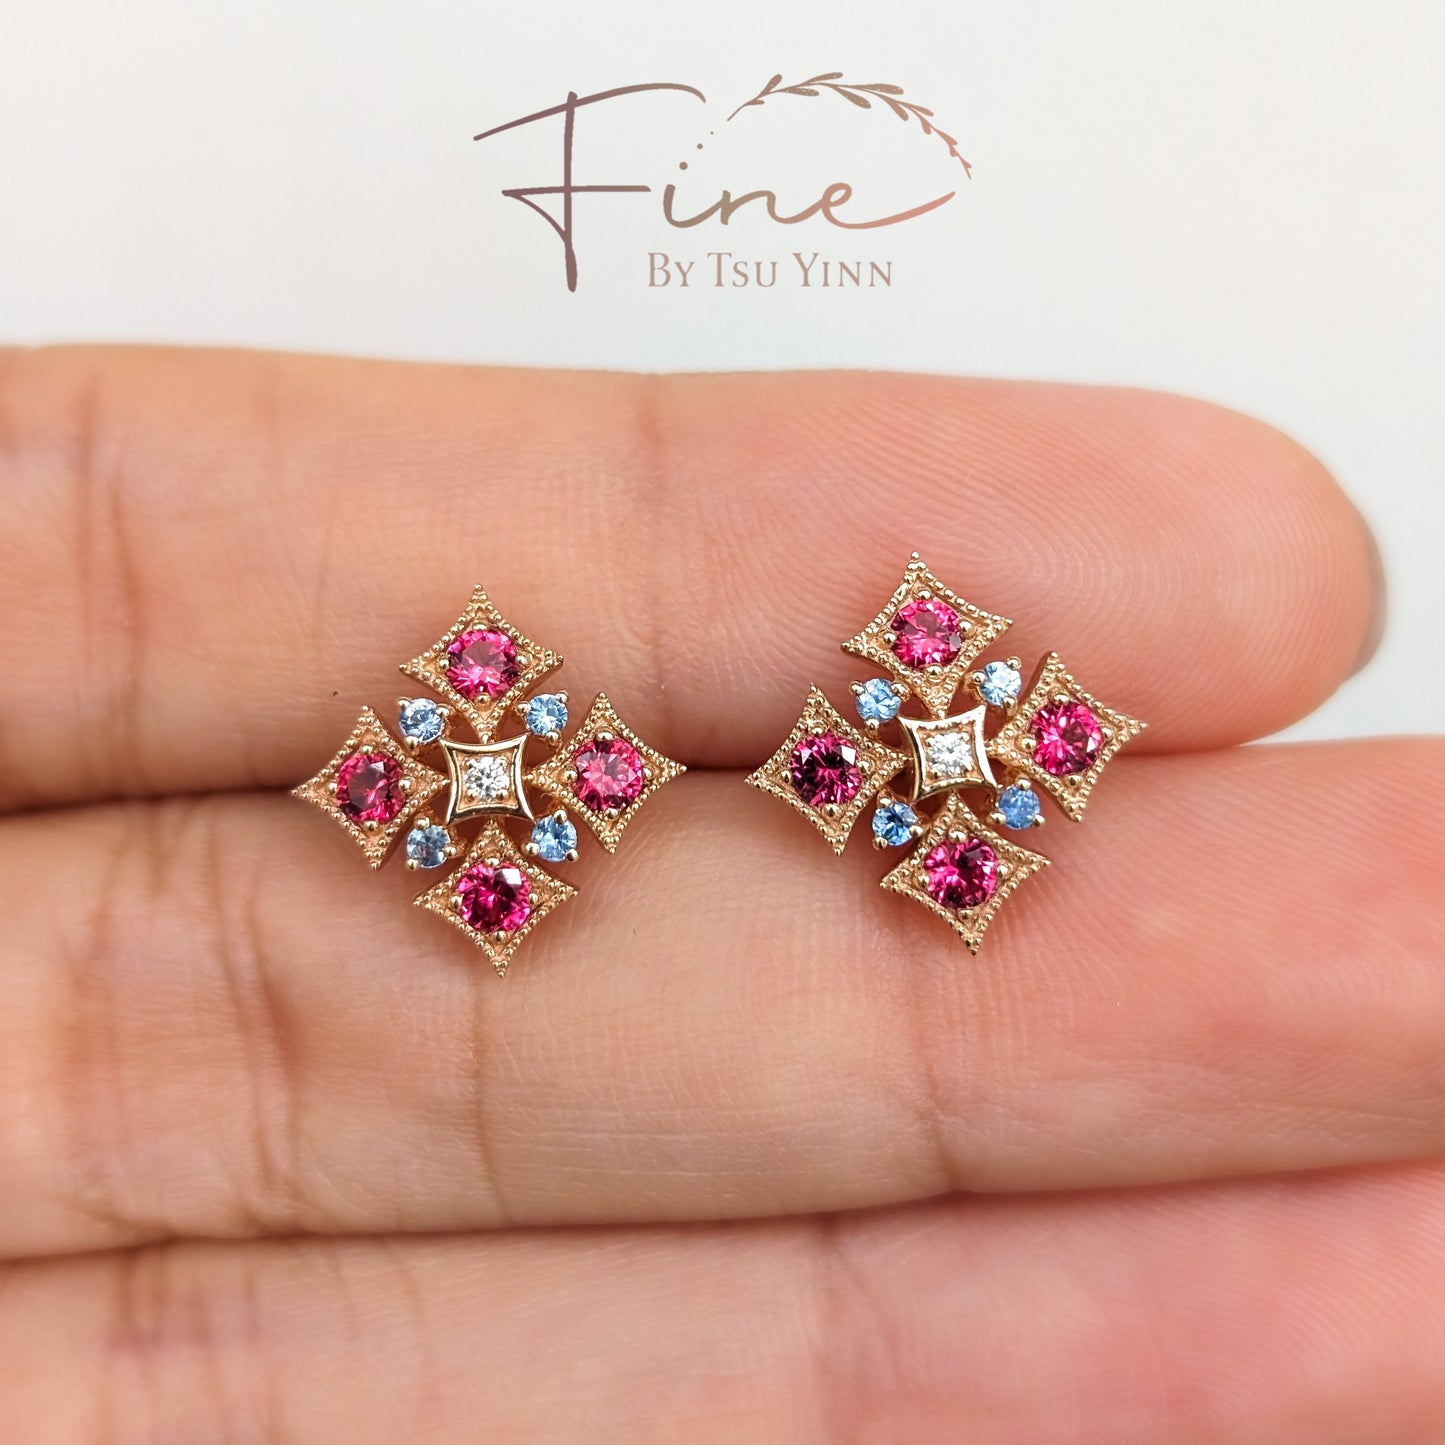 FBTY Norbayah Earrings in Reddish Pink Spinels, Blue Sapphires and Diamonds